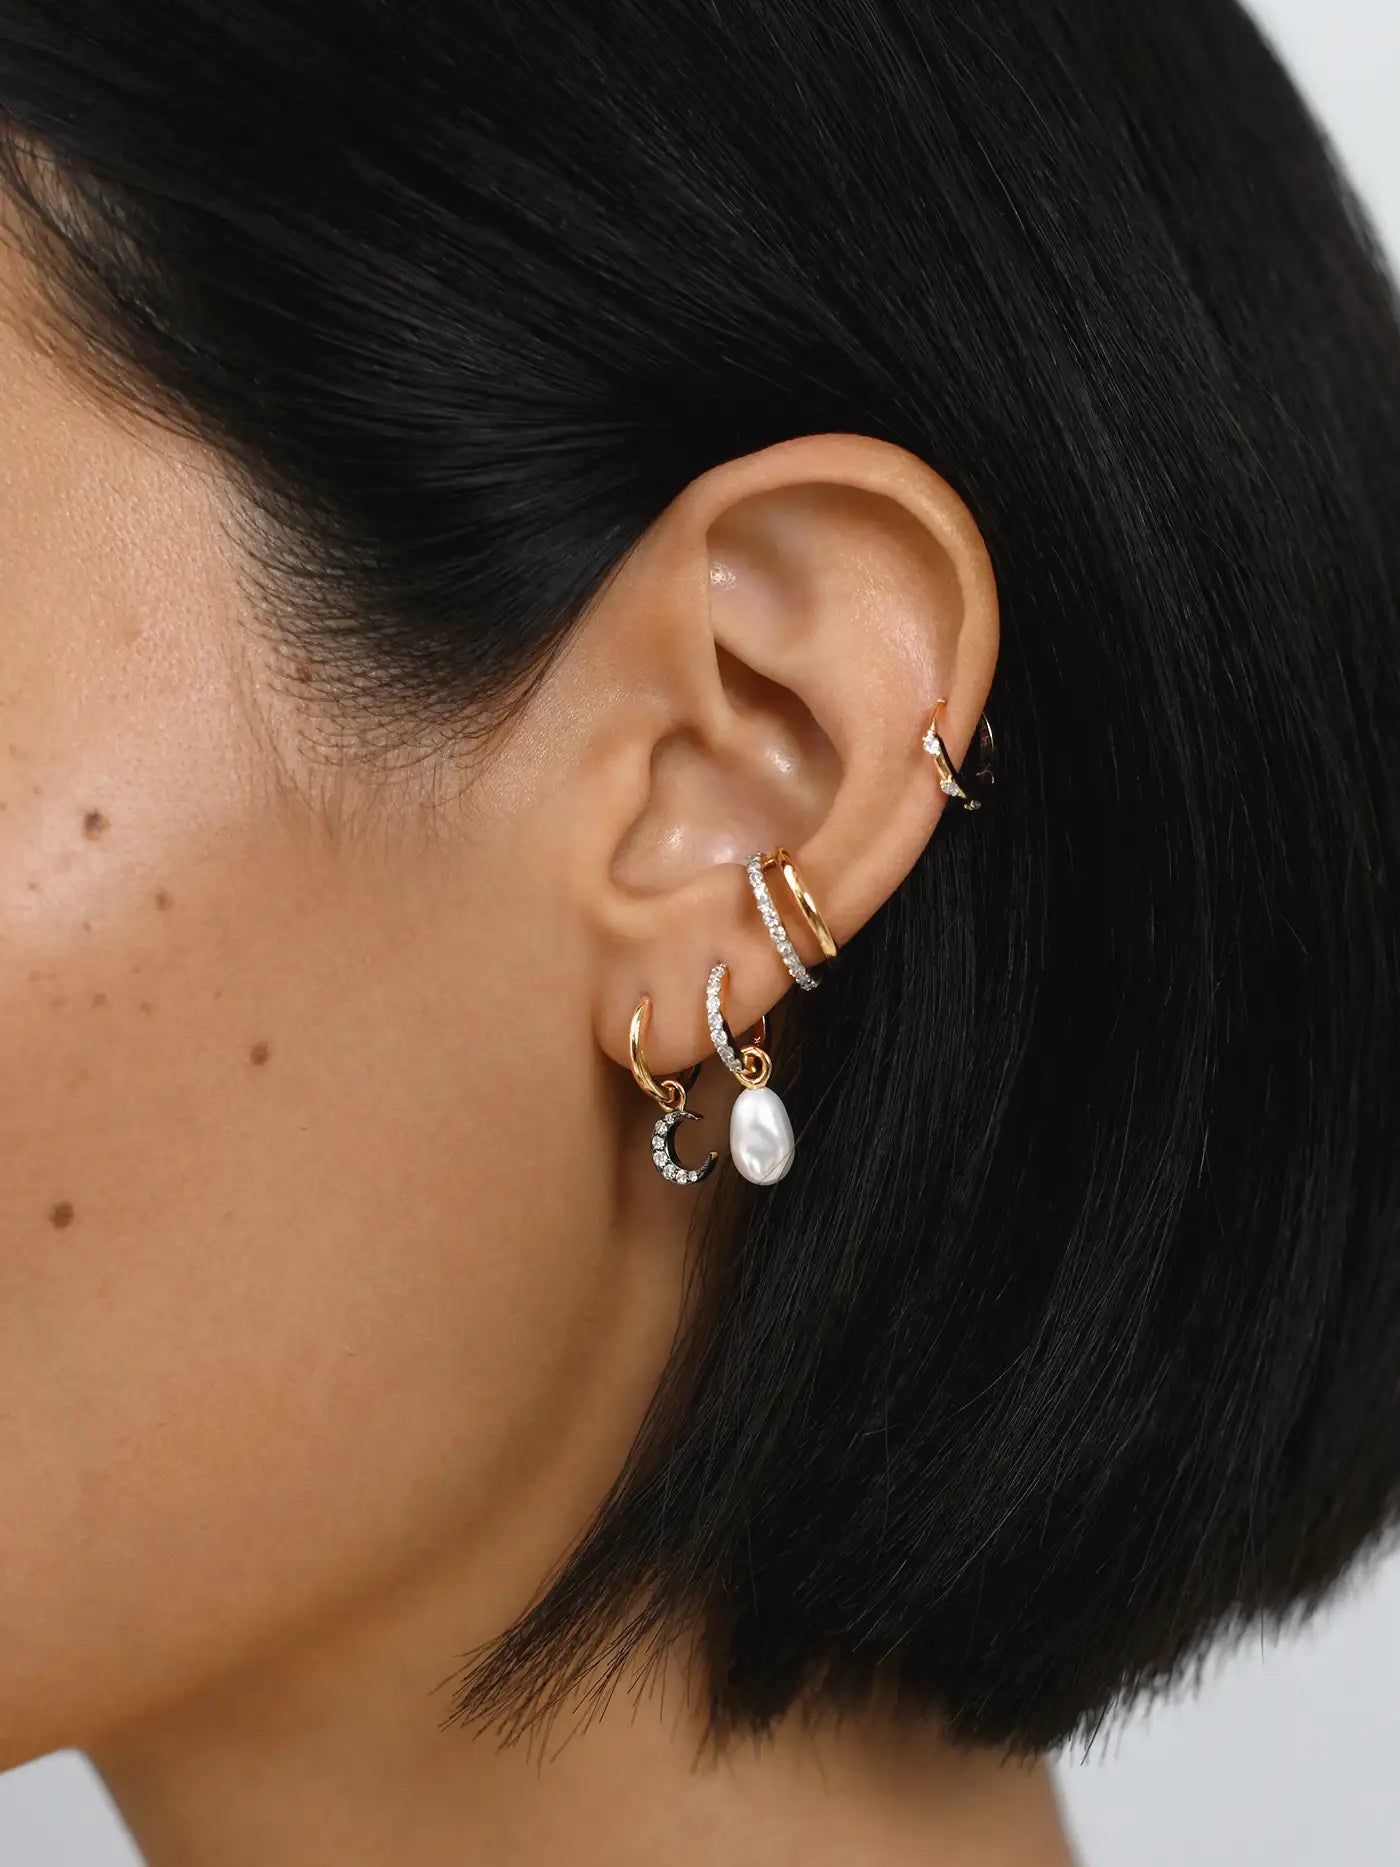 Ear Piercing Appointments - Covent Garden, London | Missoma